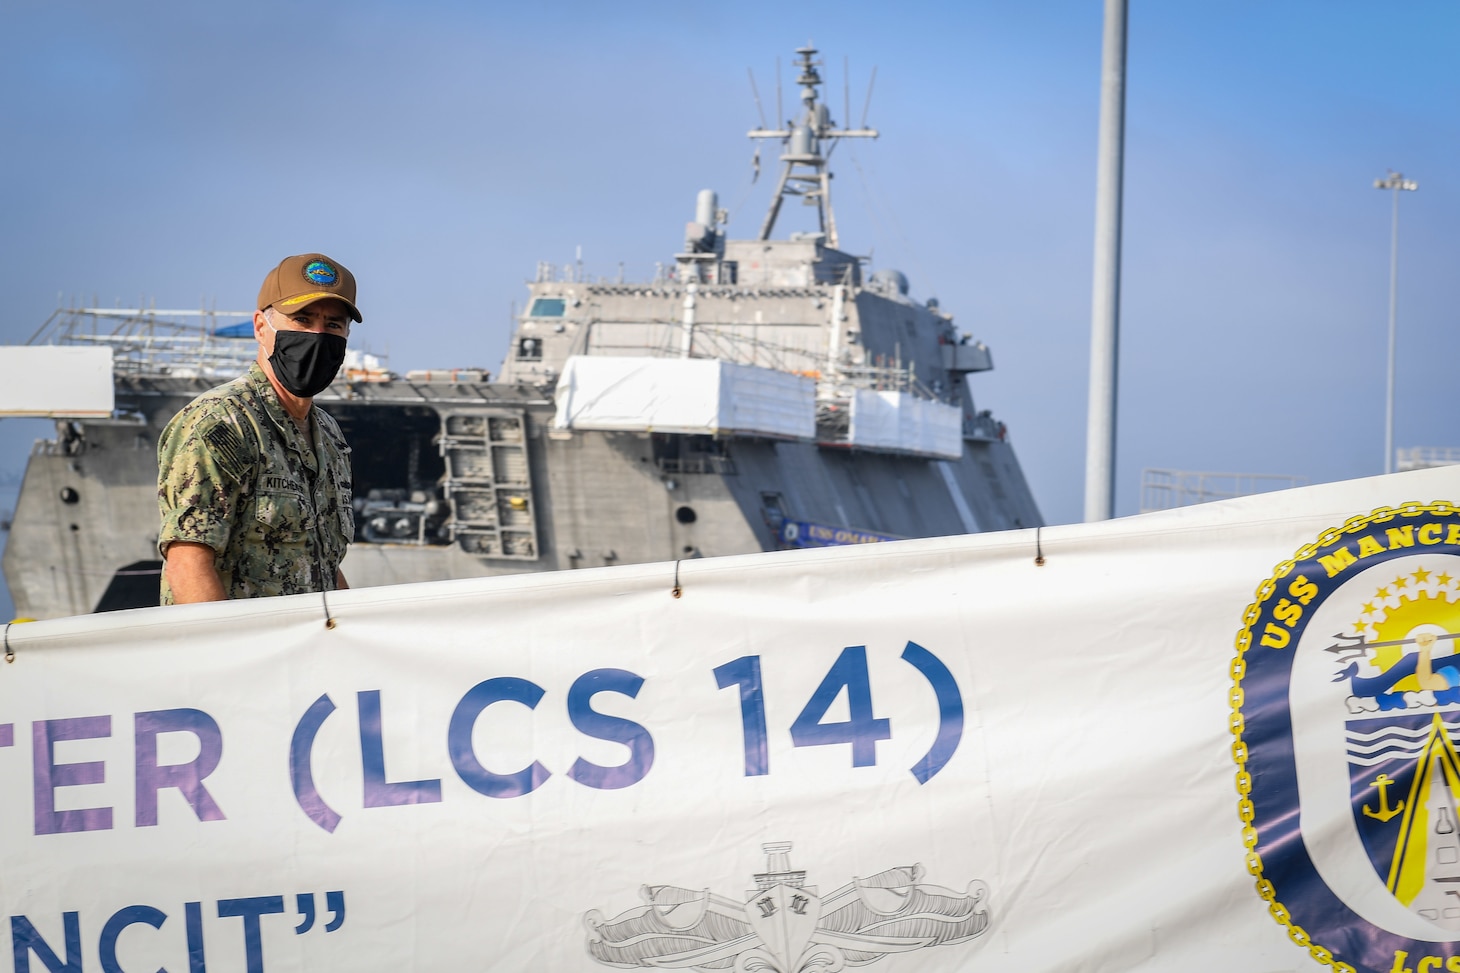 ) Vice Adm. Roy Kitchener, commander of Naval Surface Force U.S. Pacific Fleet, walks aboard the littoral combat ship USS Manchester (LCS 14) for a tour of the ship.